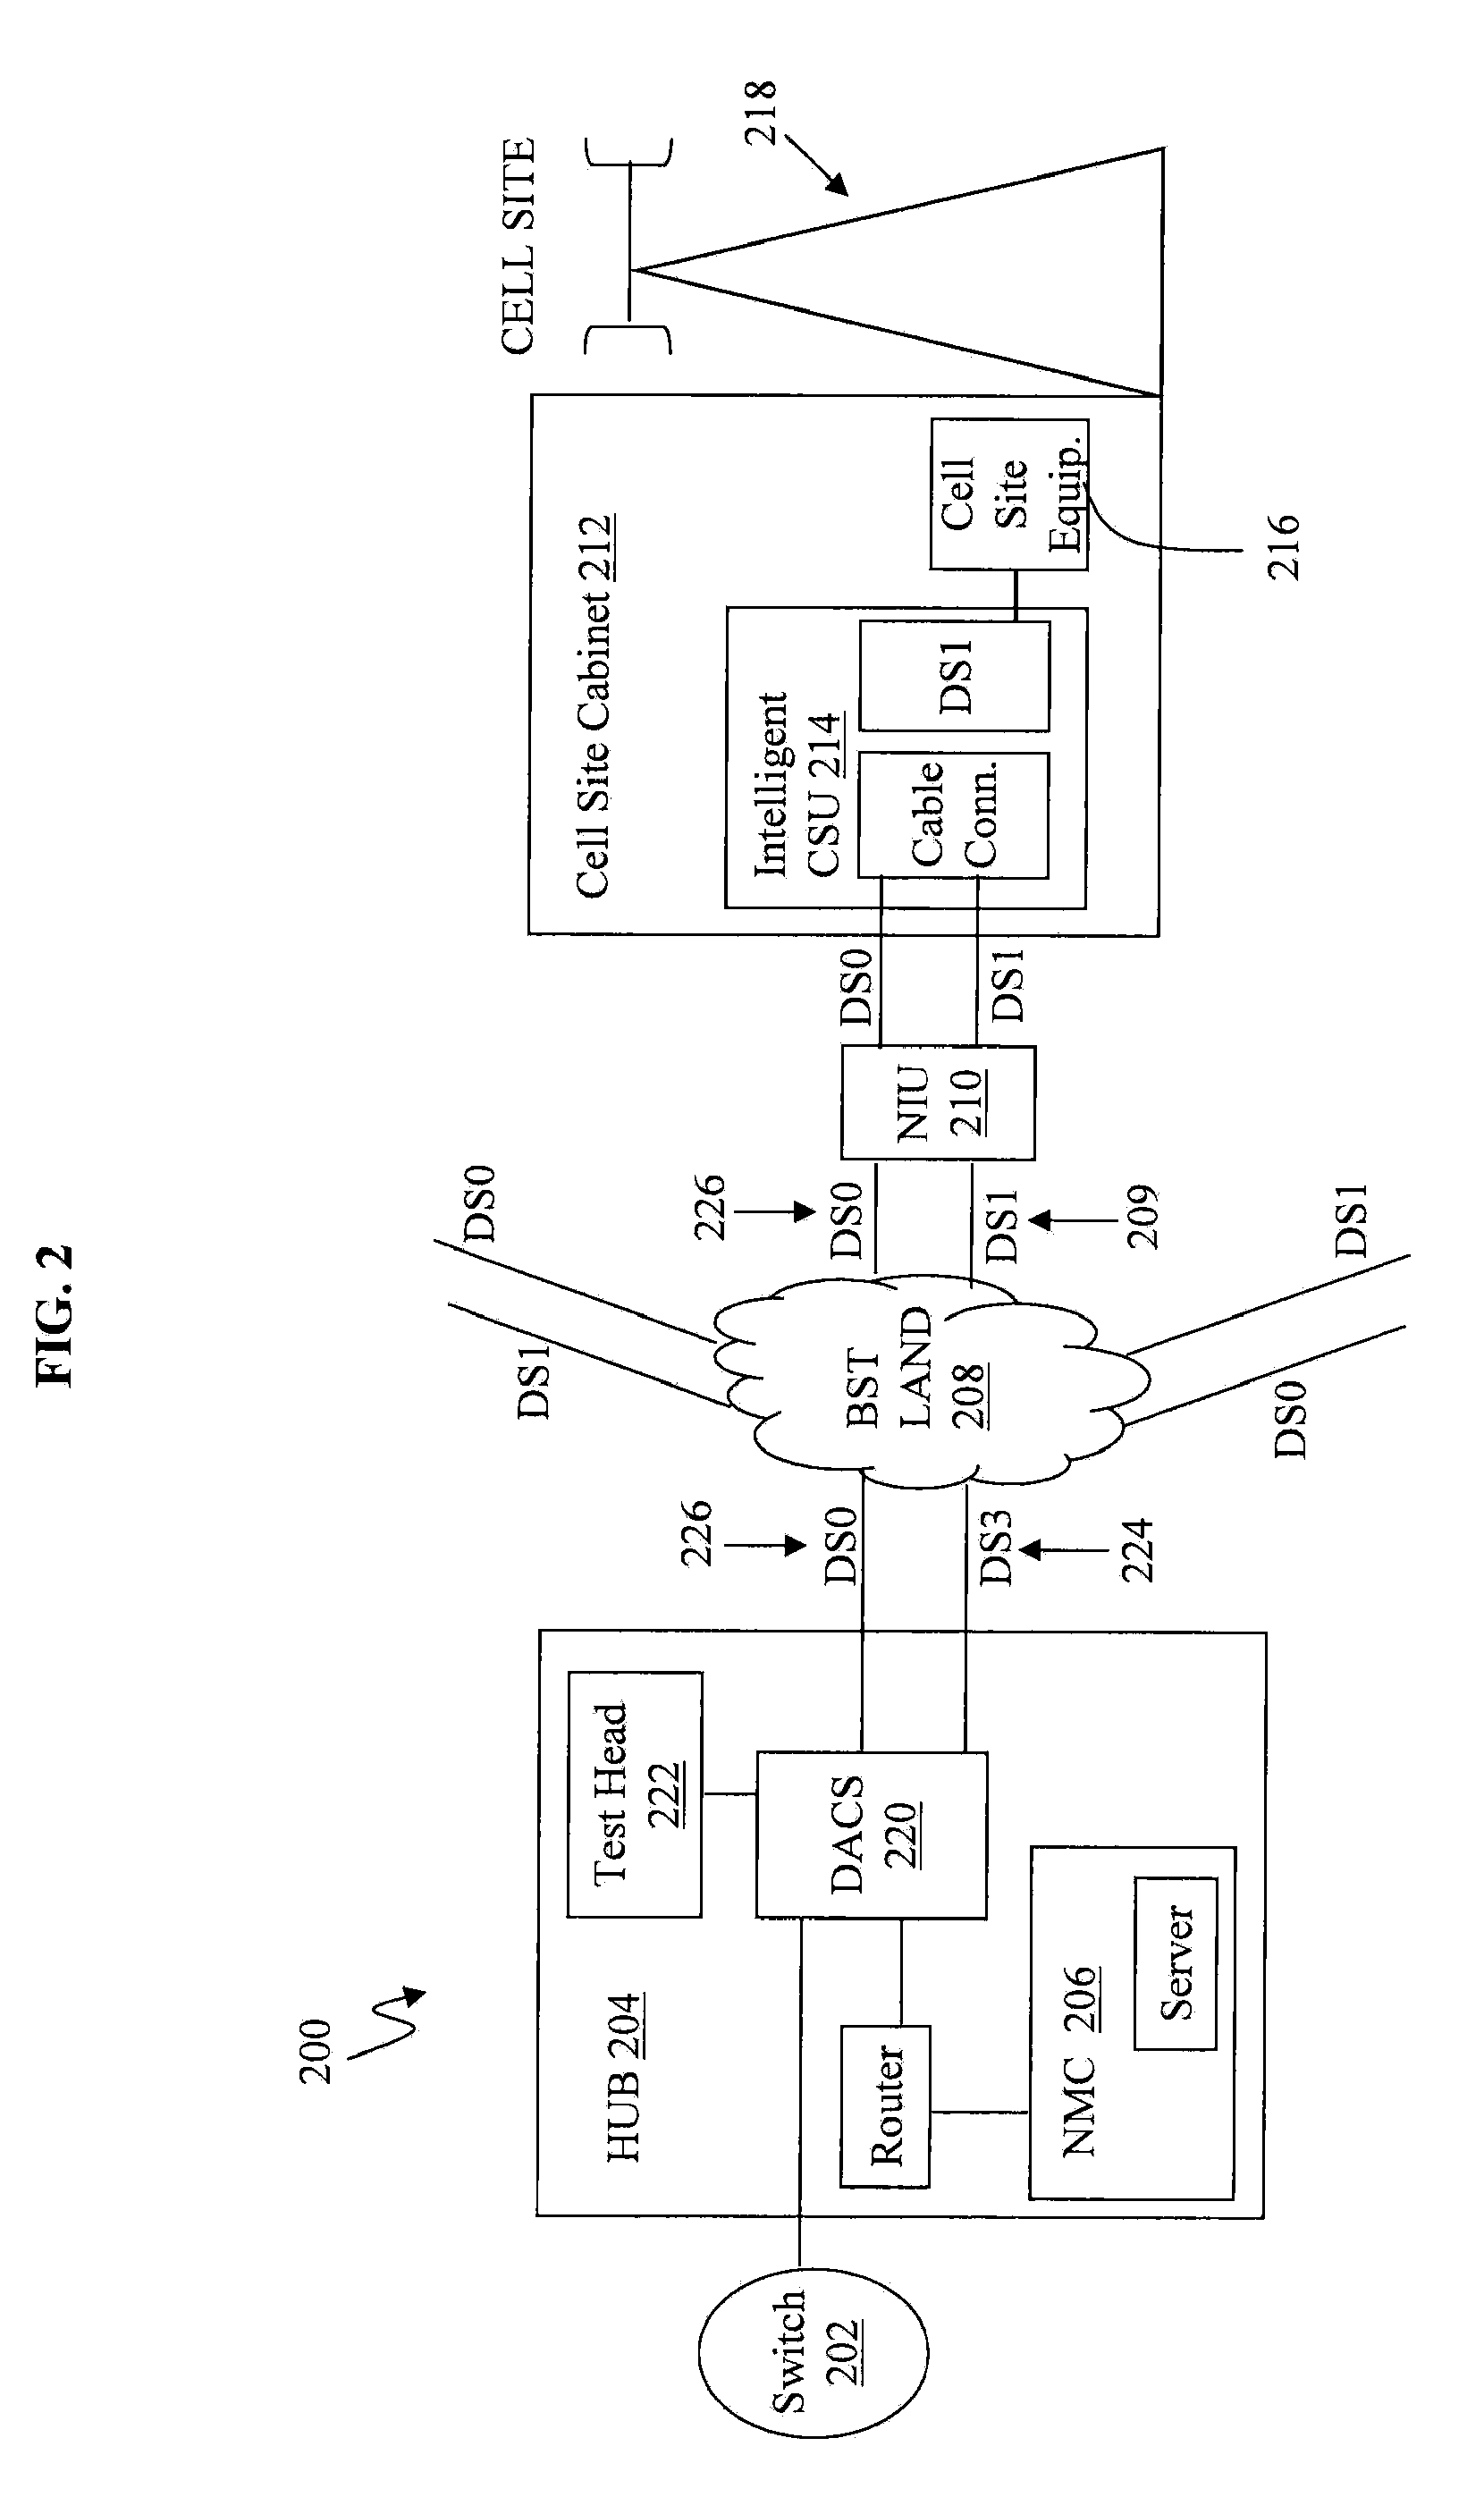 Remote testing and monitoring to a cell site in a cellular communication network